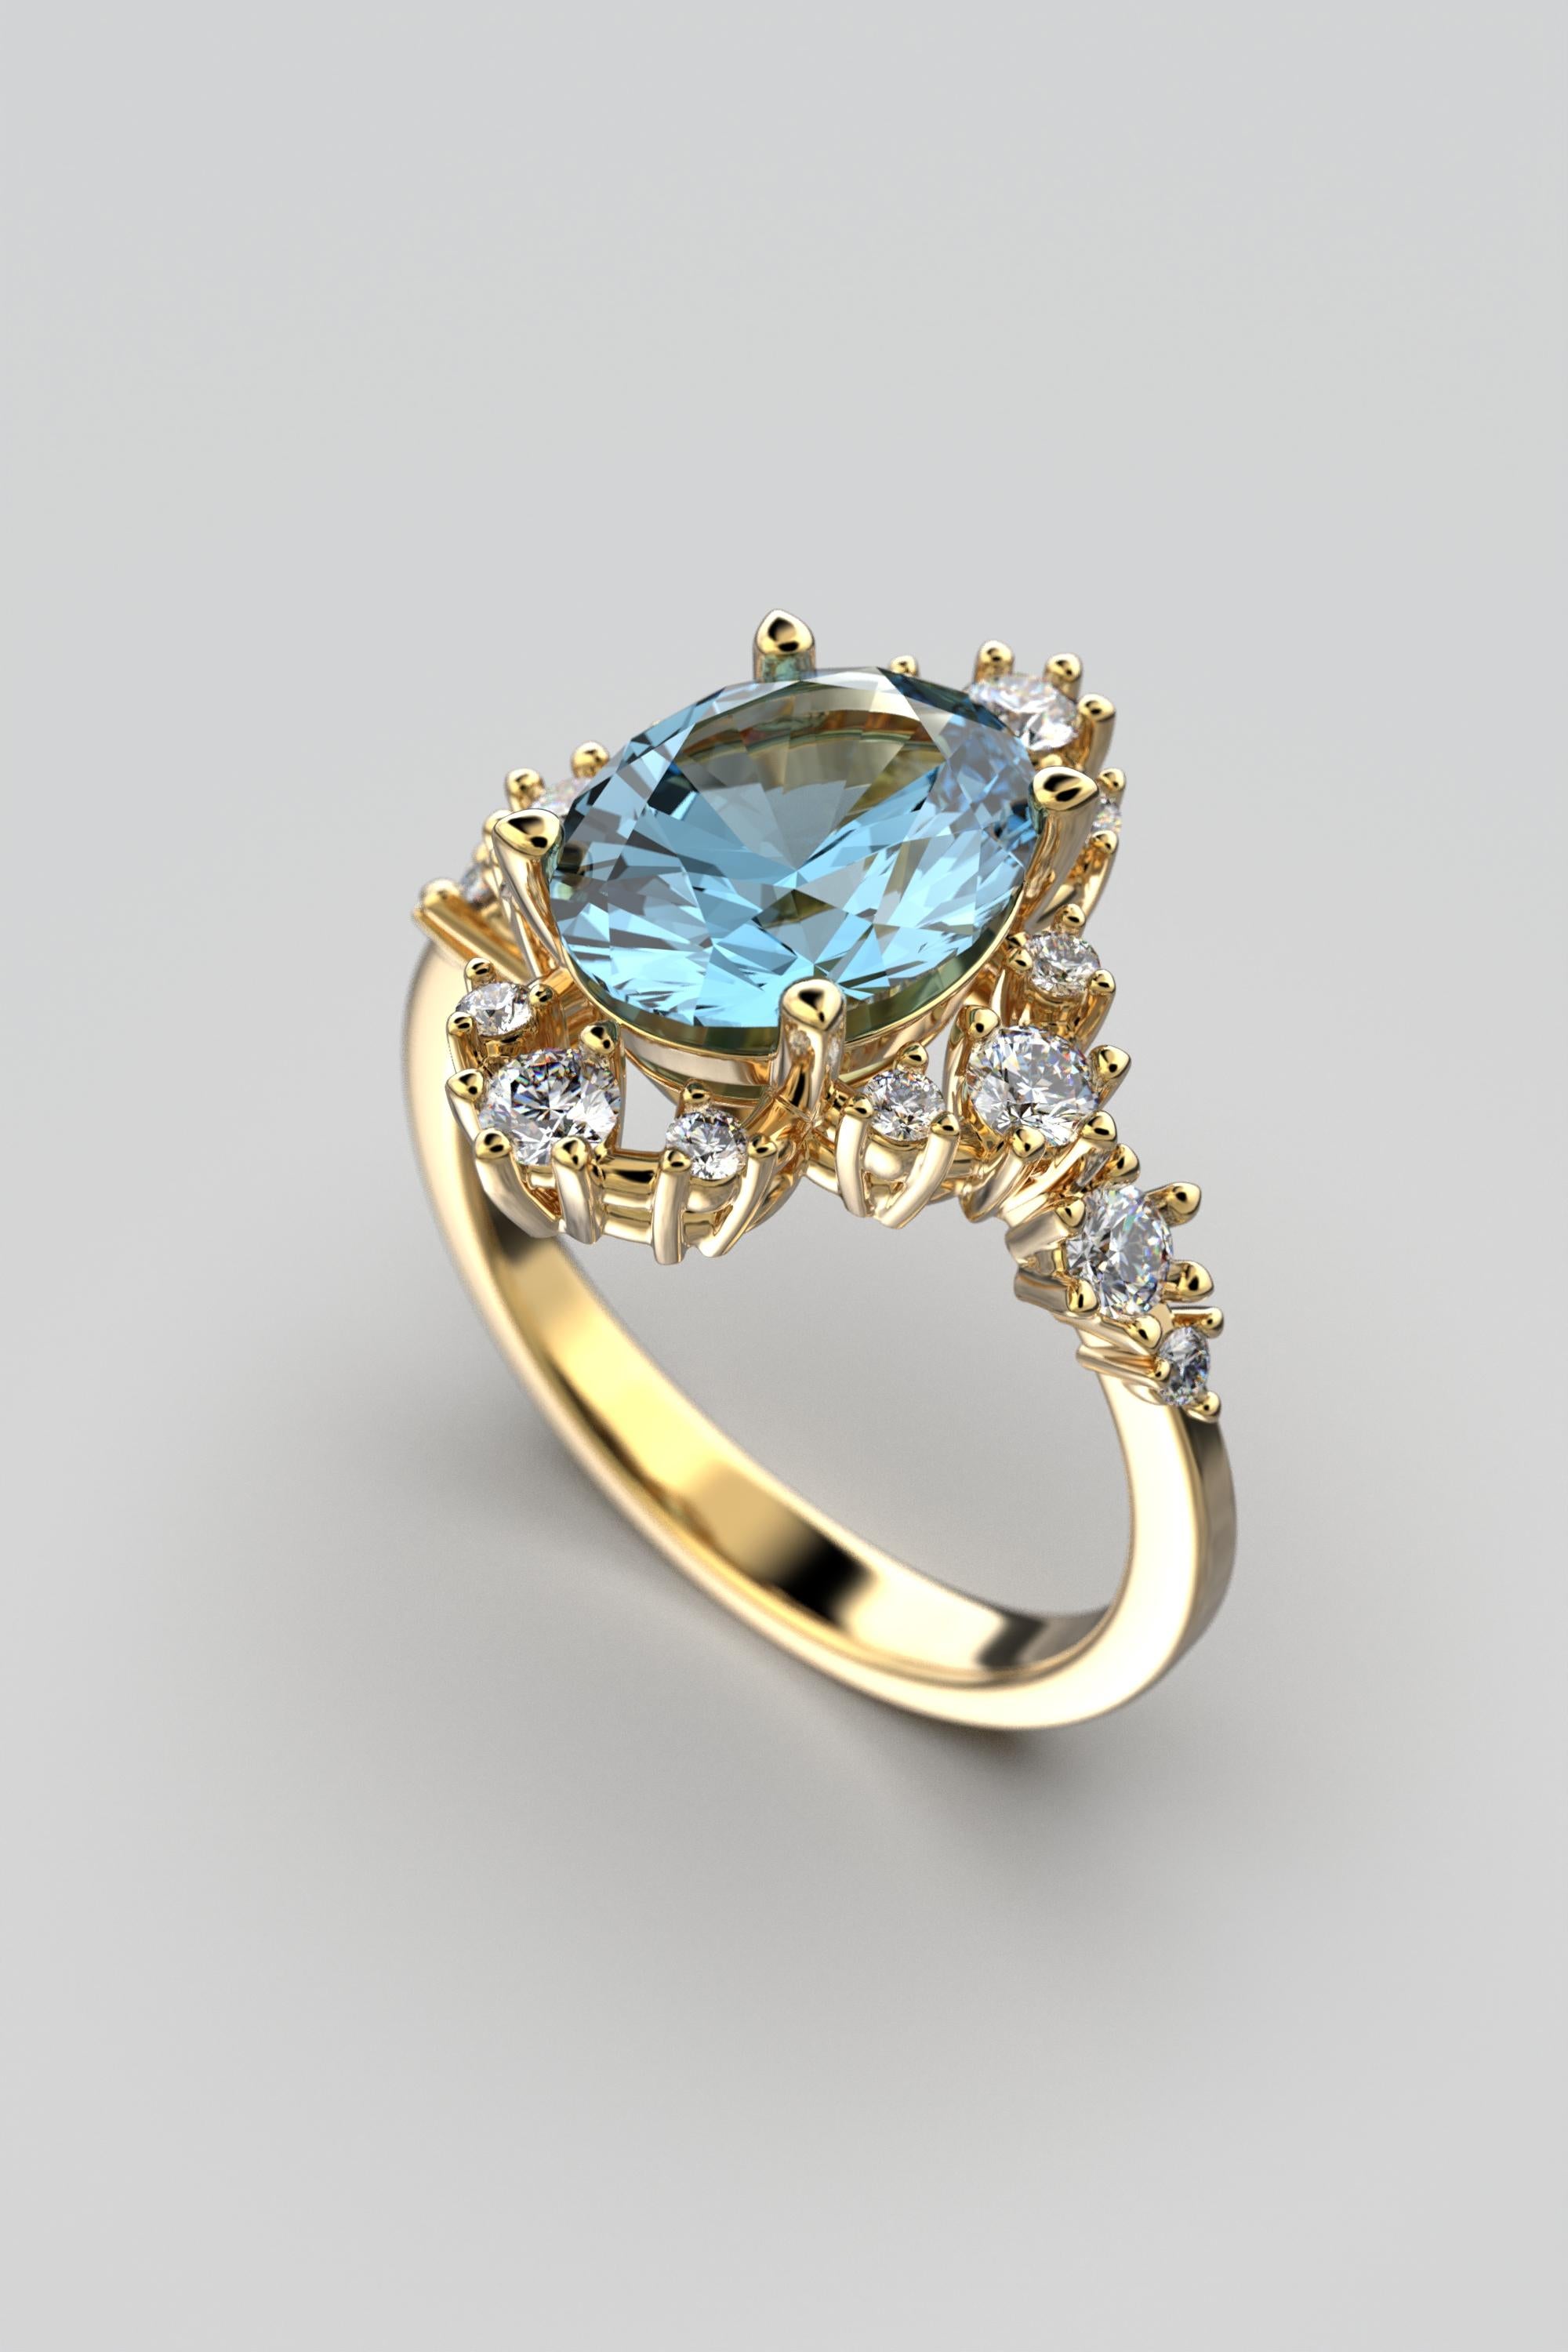 For Sale:  18k Gold Aquamarine Ring With Natural Diamonds Made in Italy Oltremare Gioielli 12